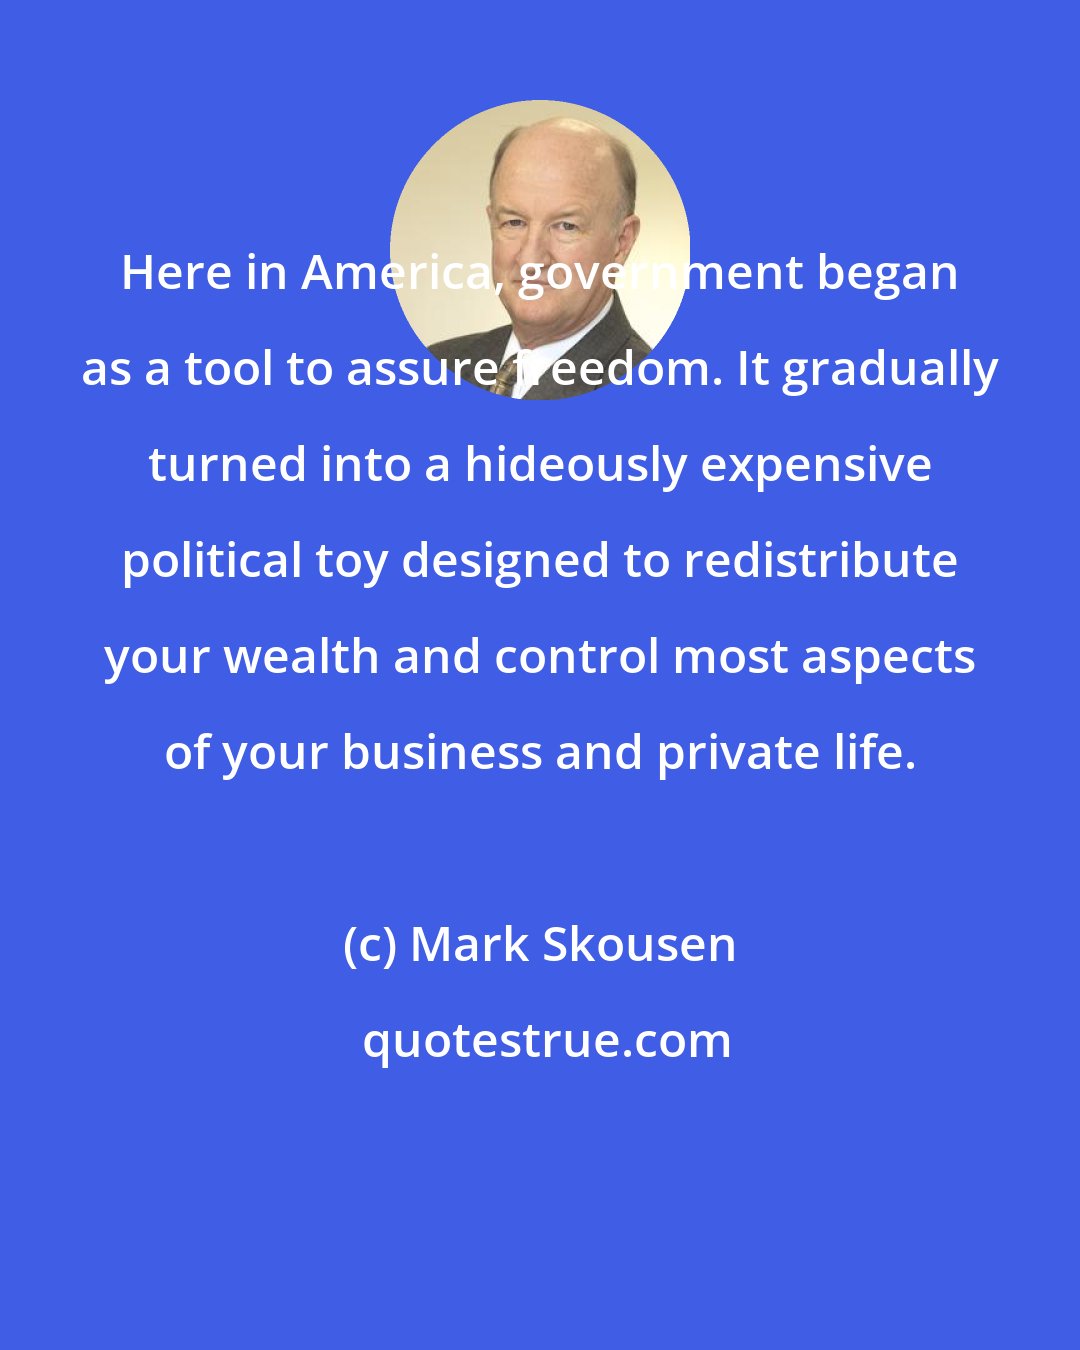 Mark Skousen: Here in America, government began as a tool to assure freedom. It gradually turned into a hideously expensive political toy designed to redistribute your wealth and control most aspects of your business and private life.